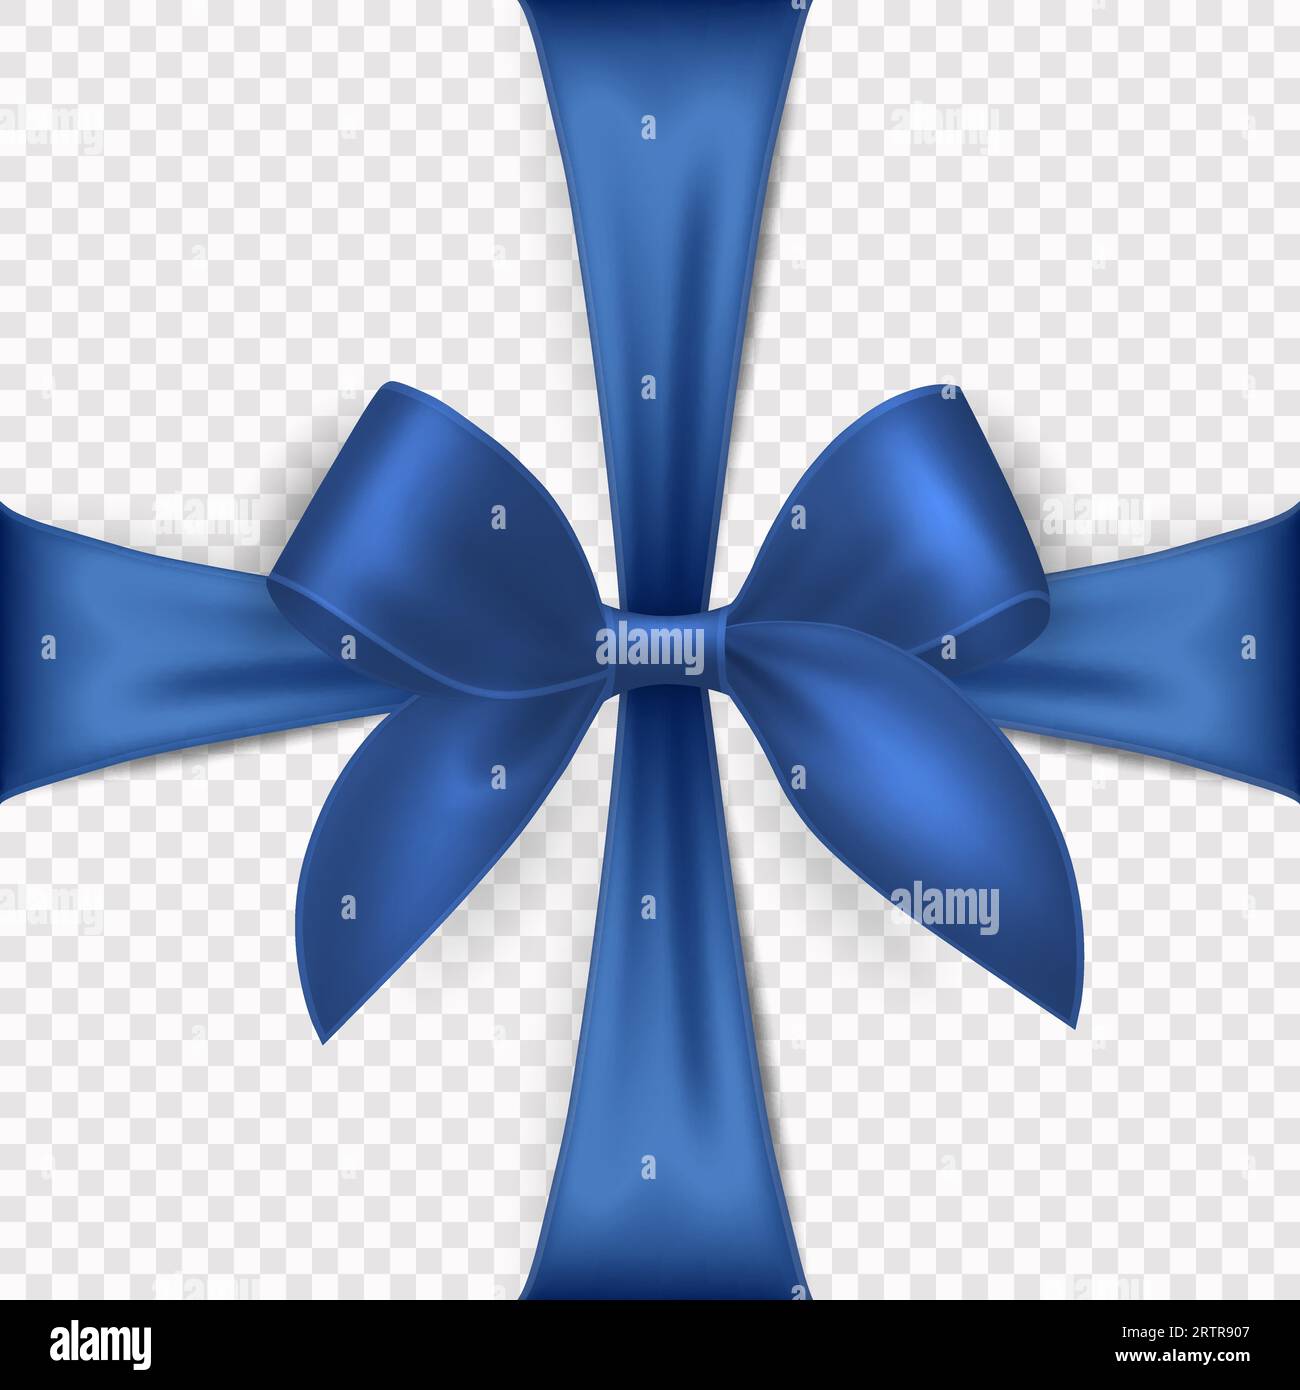 White round gift box with blue ribbon and bow Vector Image